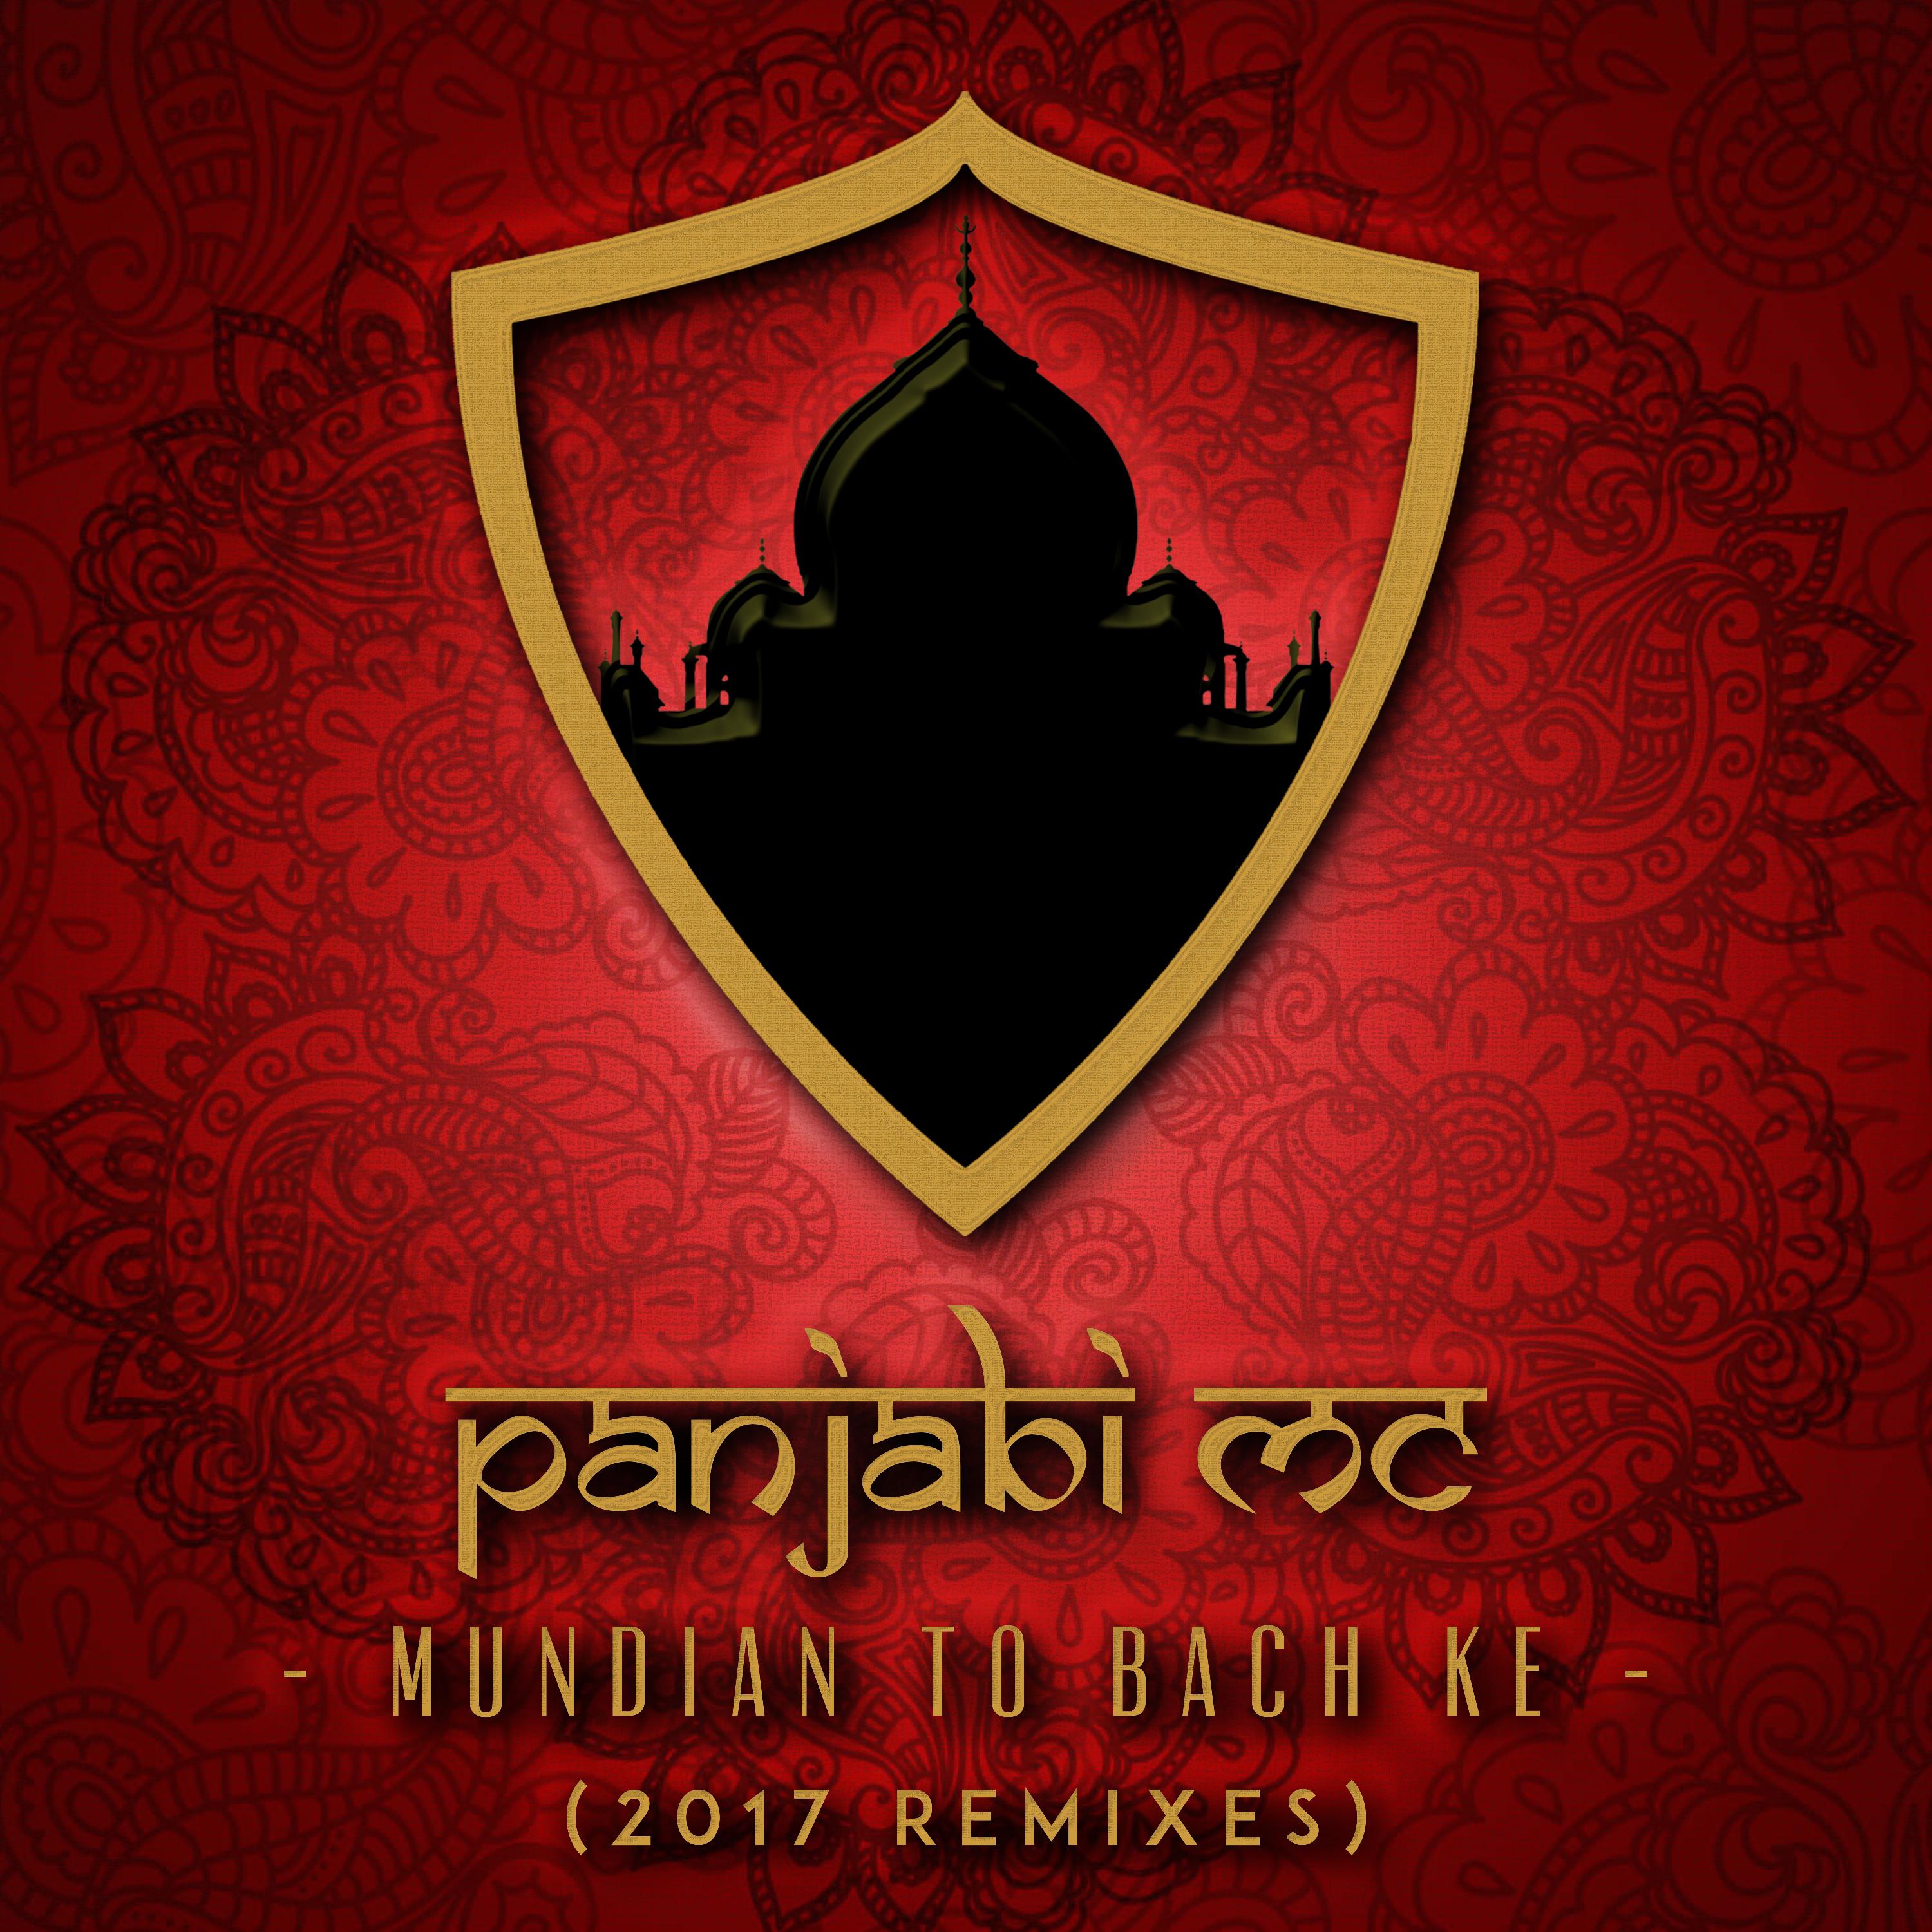 Mundian to Bach Ke Faure Extended Remix